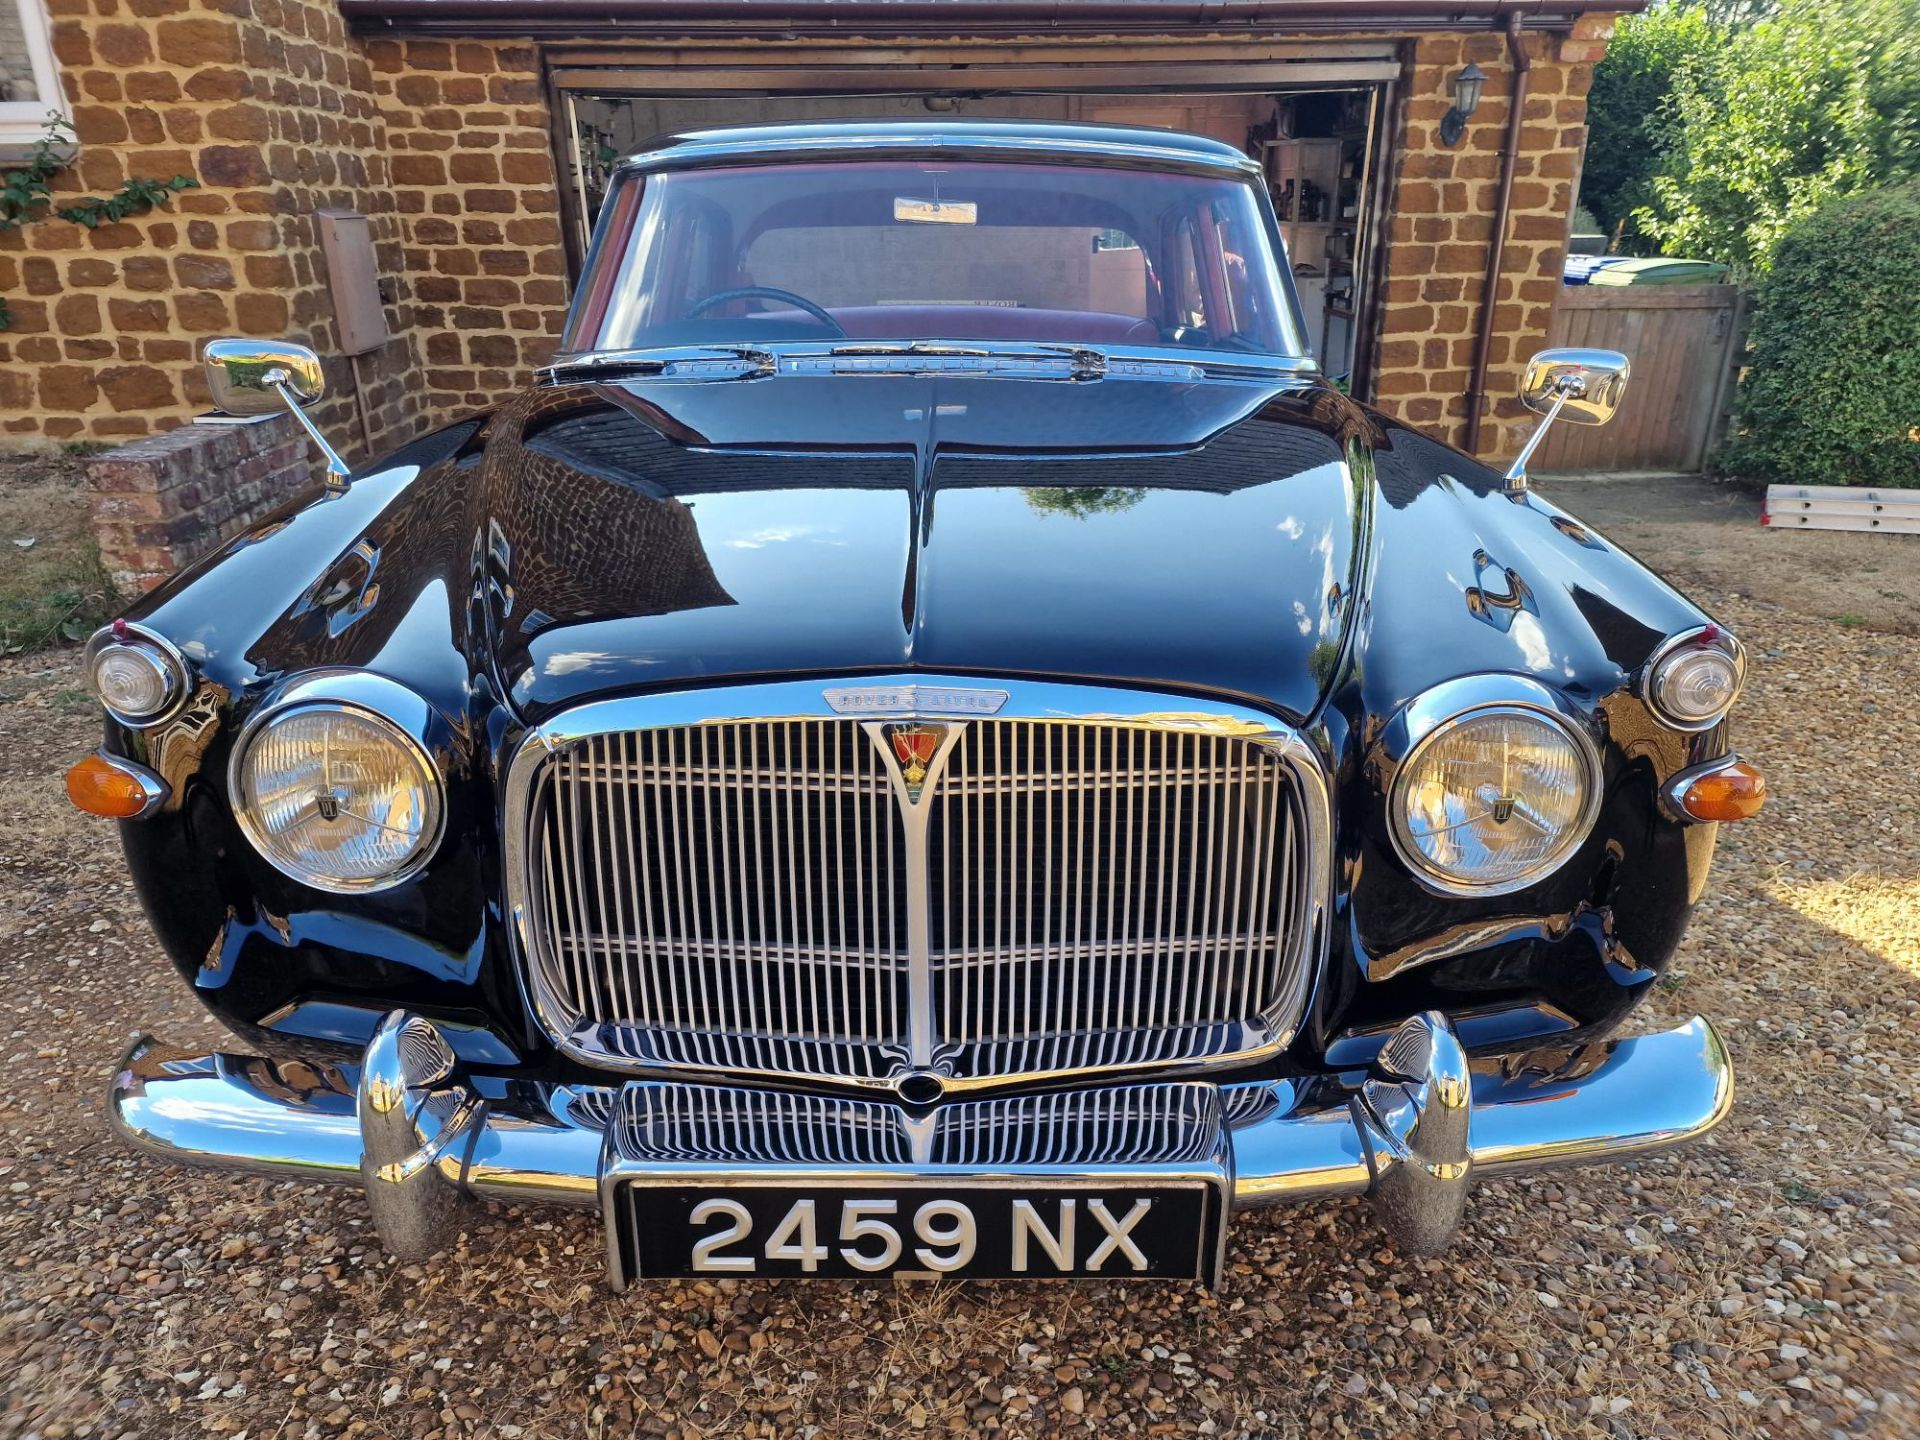 1959 Rover 3-Litre Saloon Mk1 (P5) - Image 8 of 10